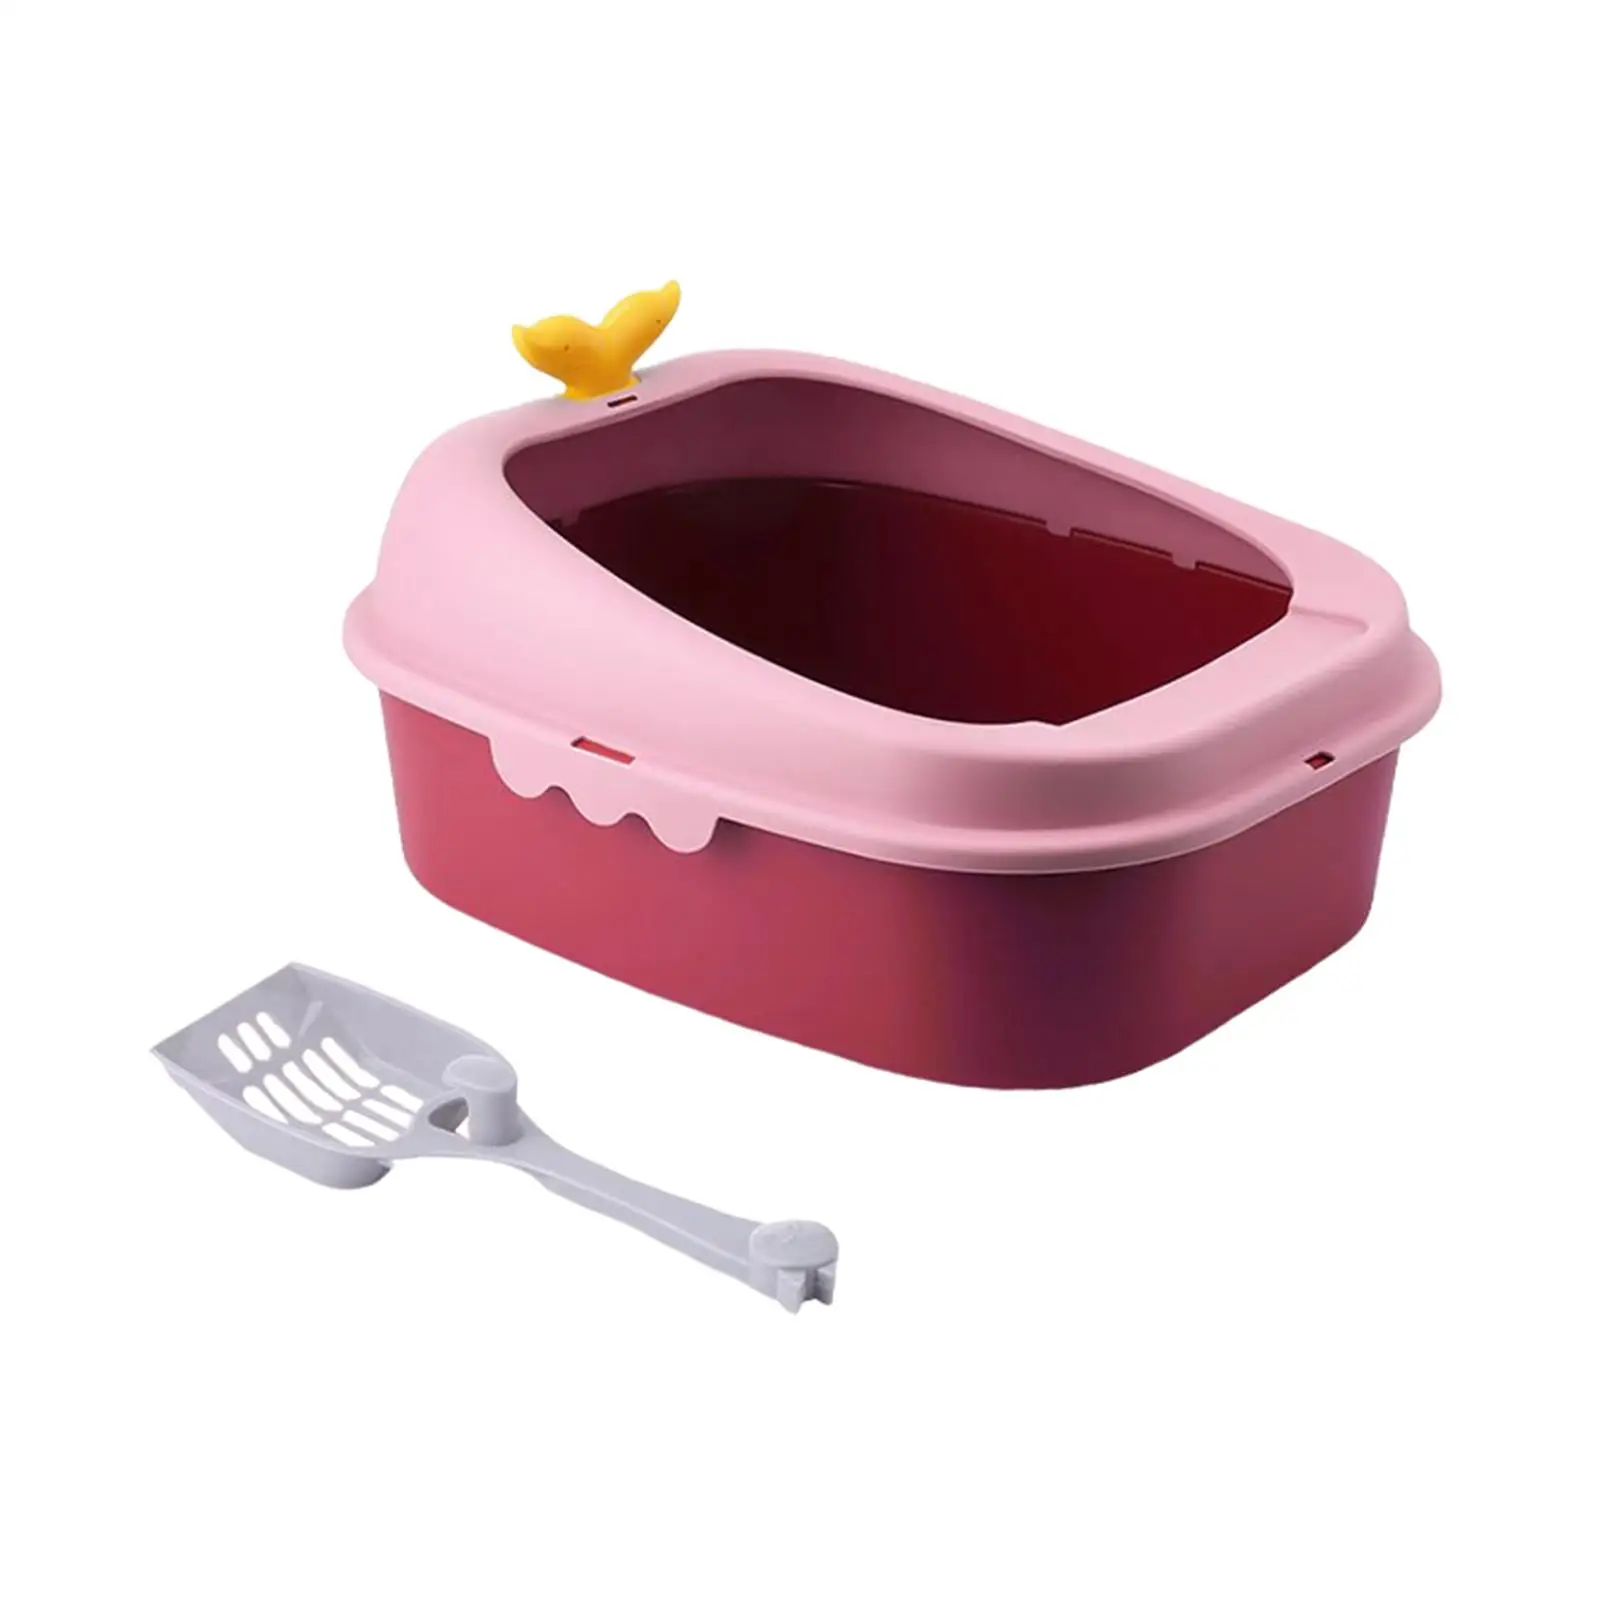 Kitten Potty Toilet Open Top Pet Litter Tray PP Cat Litter Tray for Rabbit Small Animals Cats Kittens Easy to Clean and Assemble